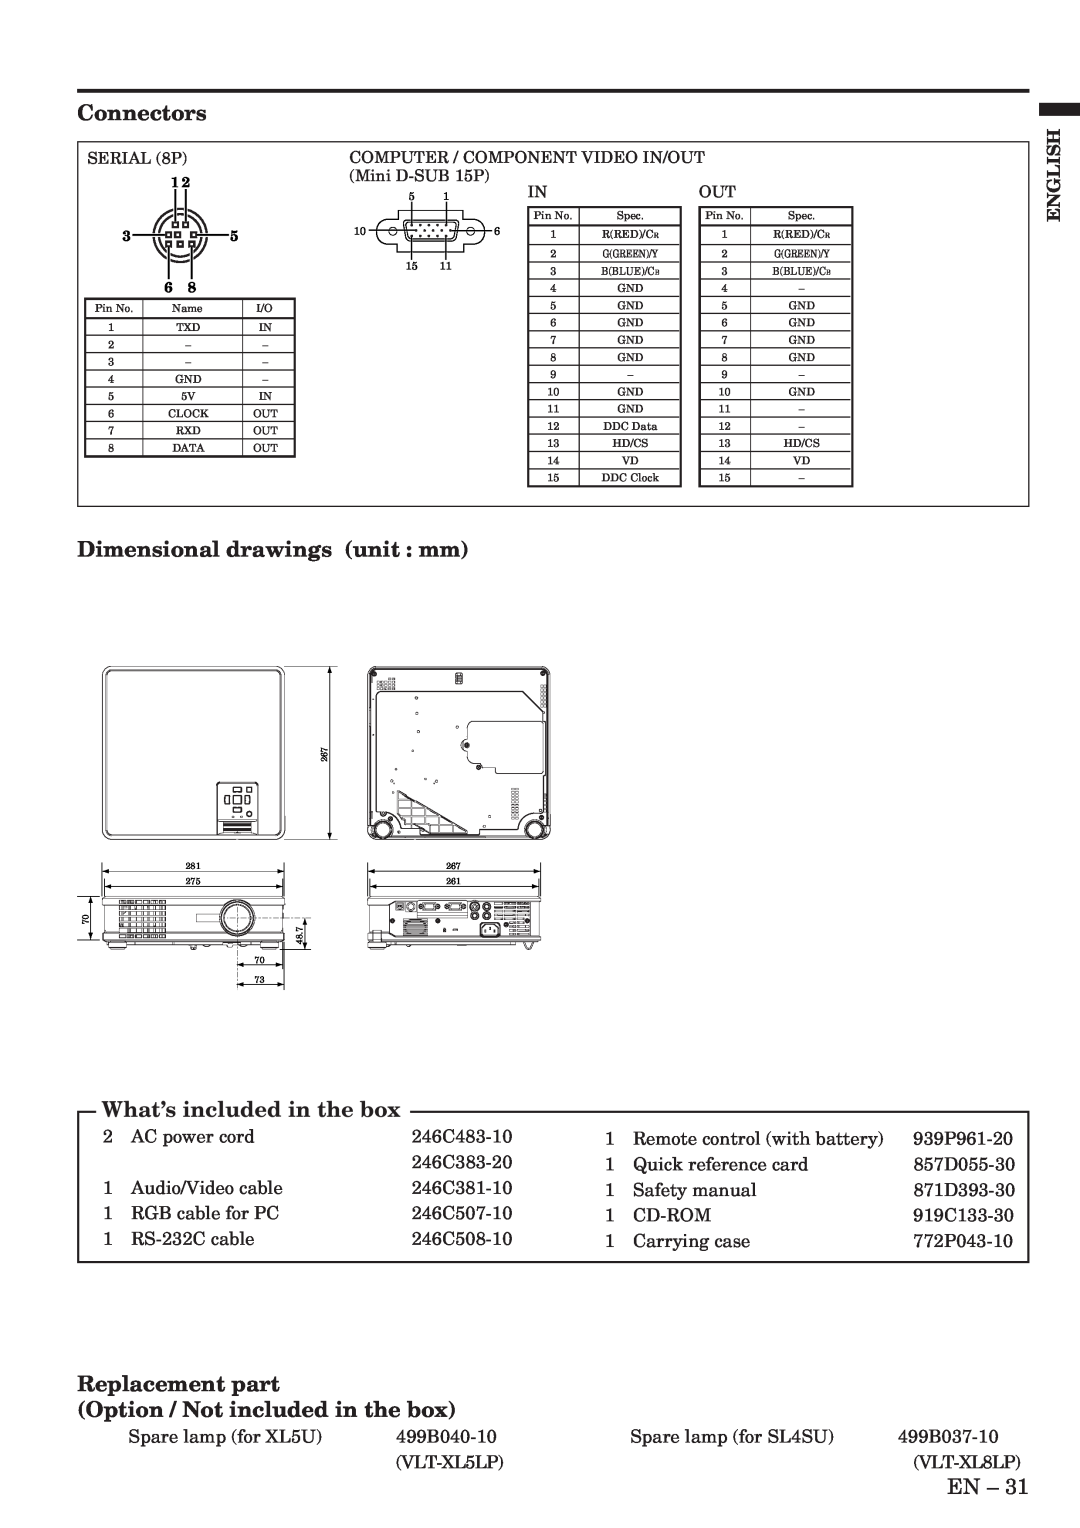 Mitsubishi Electronics XL5U user manual Connectors, Dimensional drawings unit mm, What’s included in the box, English 